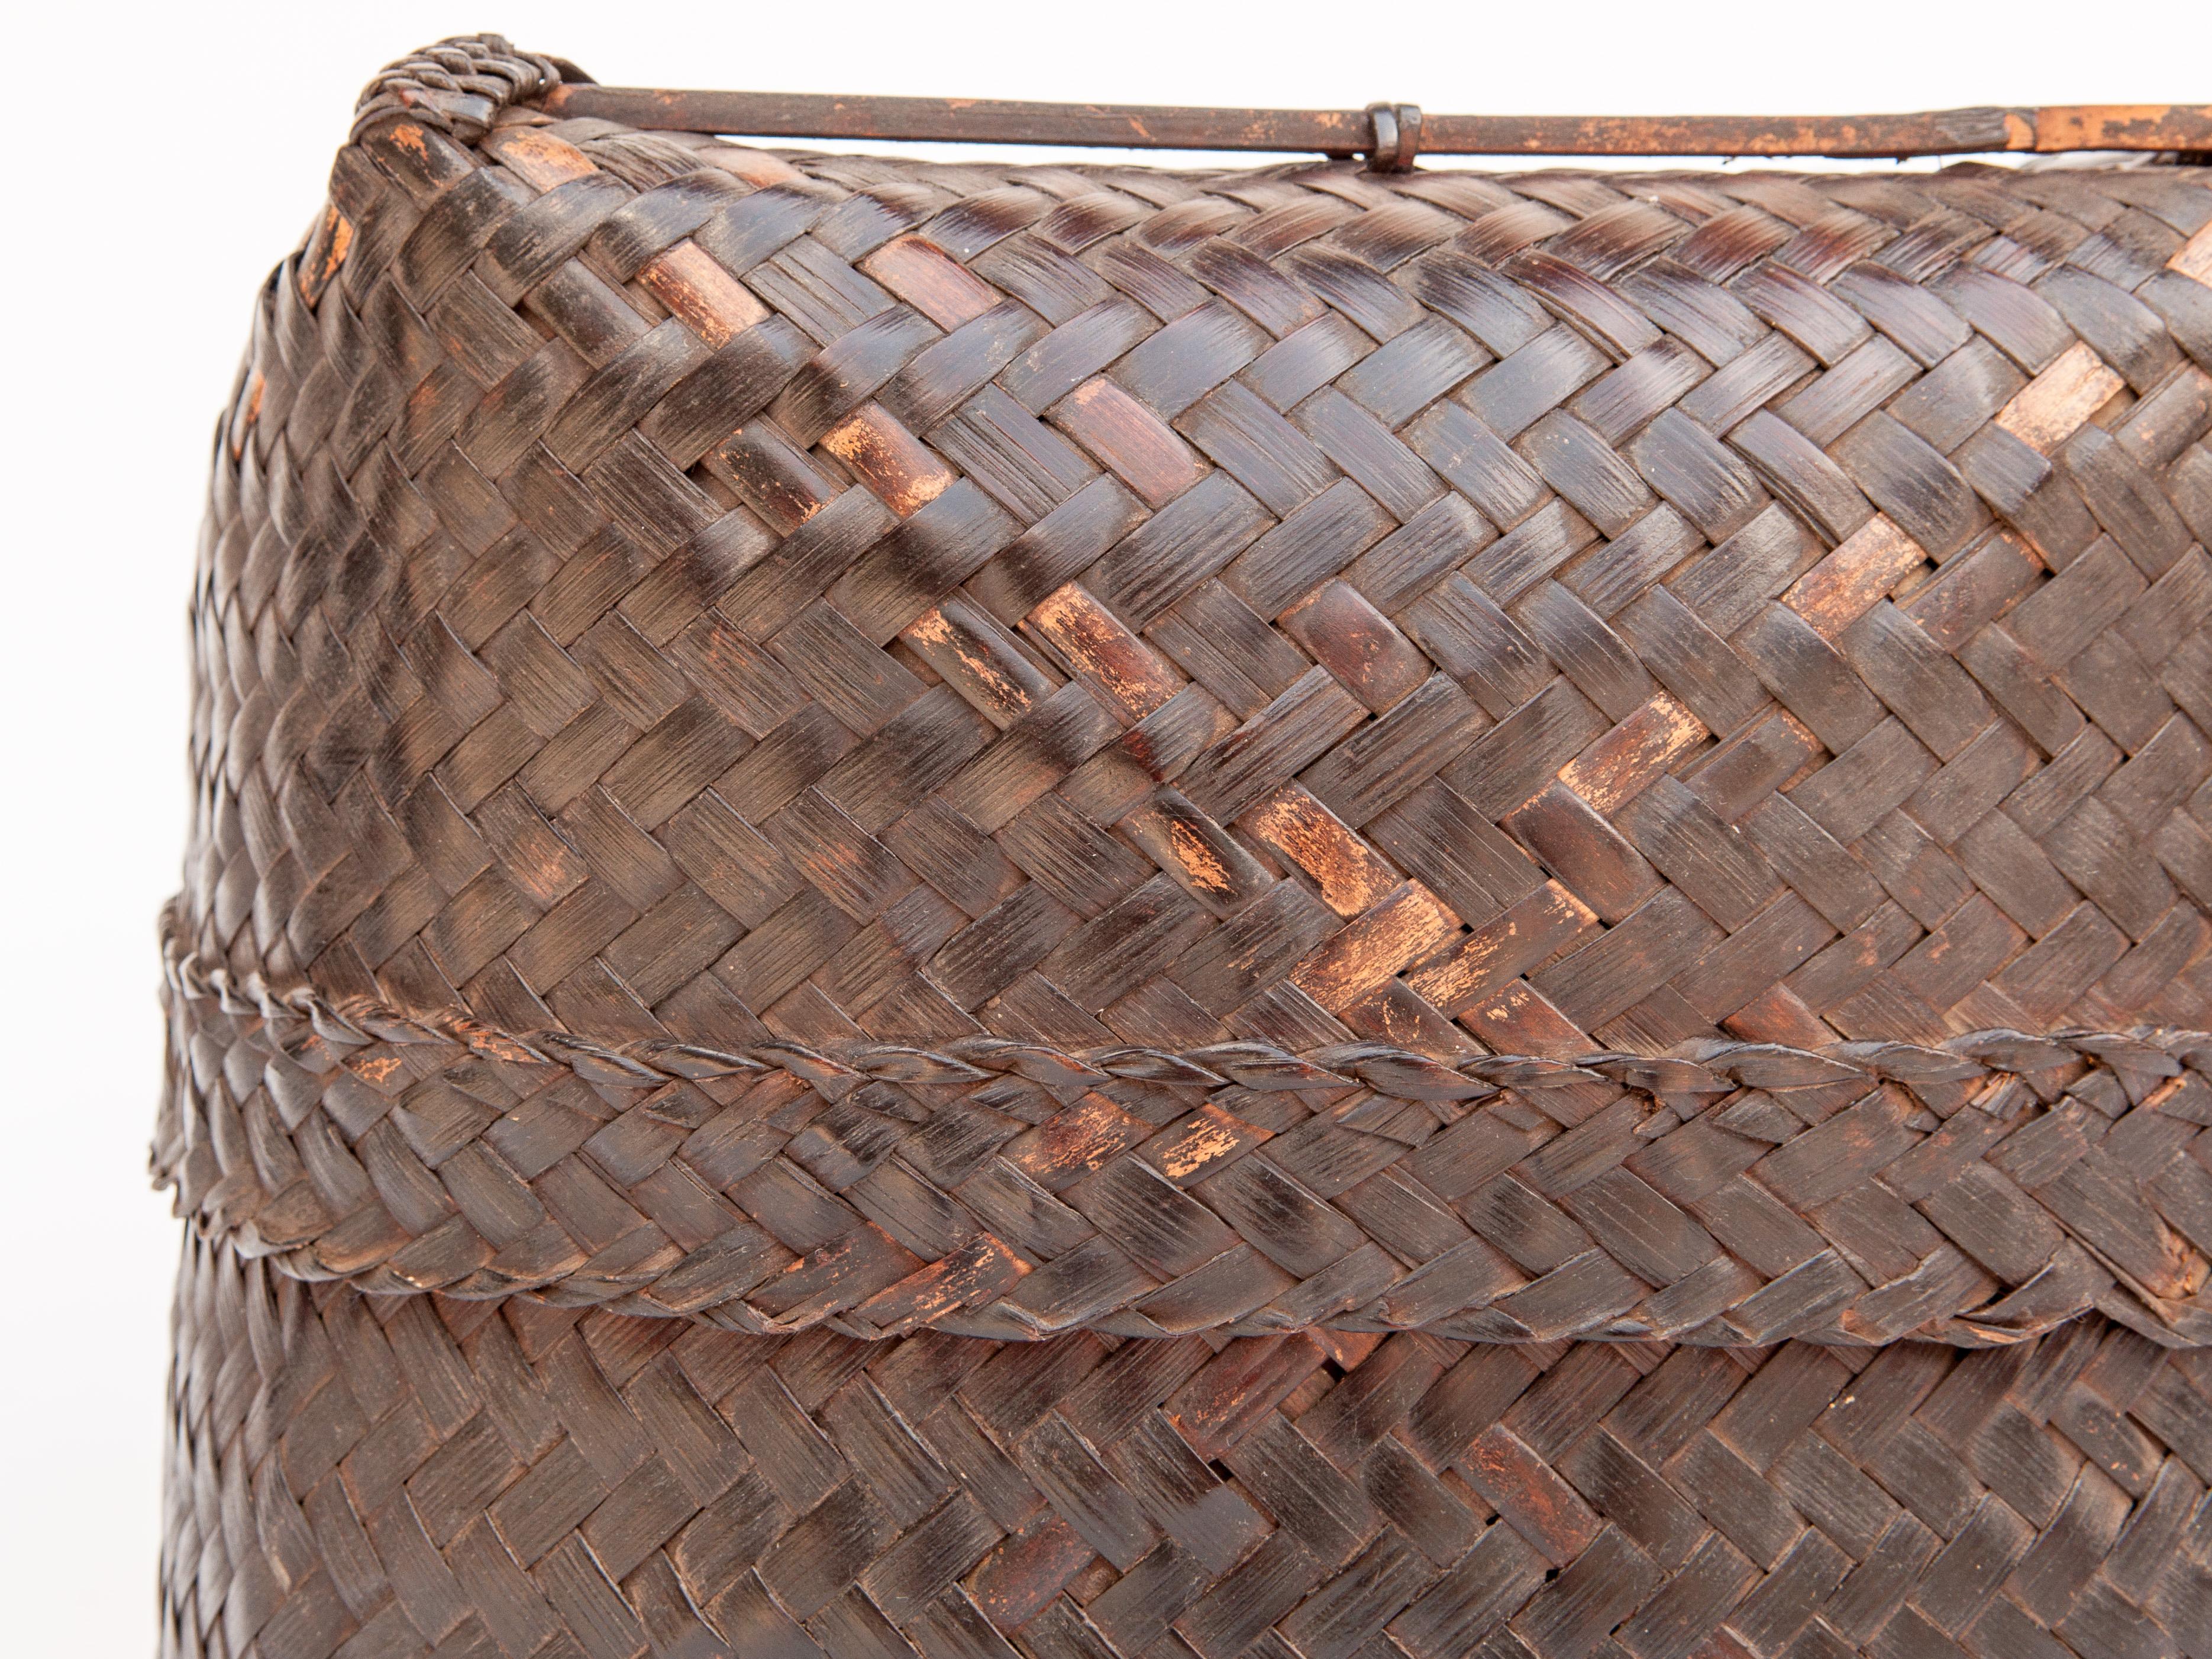 Hand-Crafted Vintage Bamboo Storage Basket with Lid Lombok, Indonesia, Mid-Late 20th Century